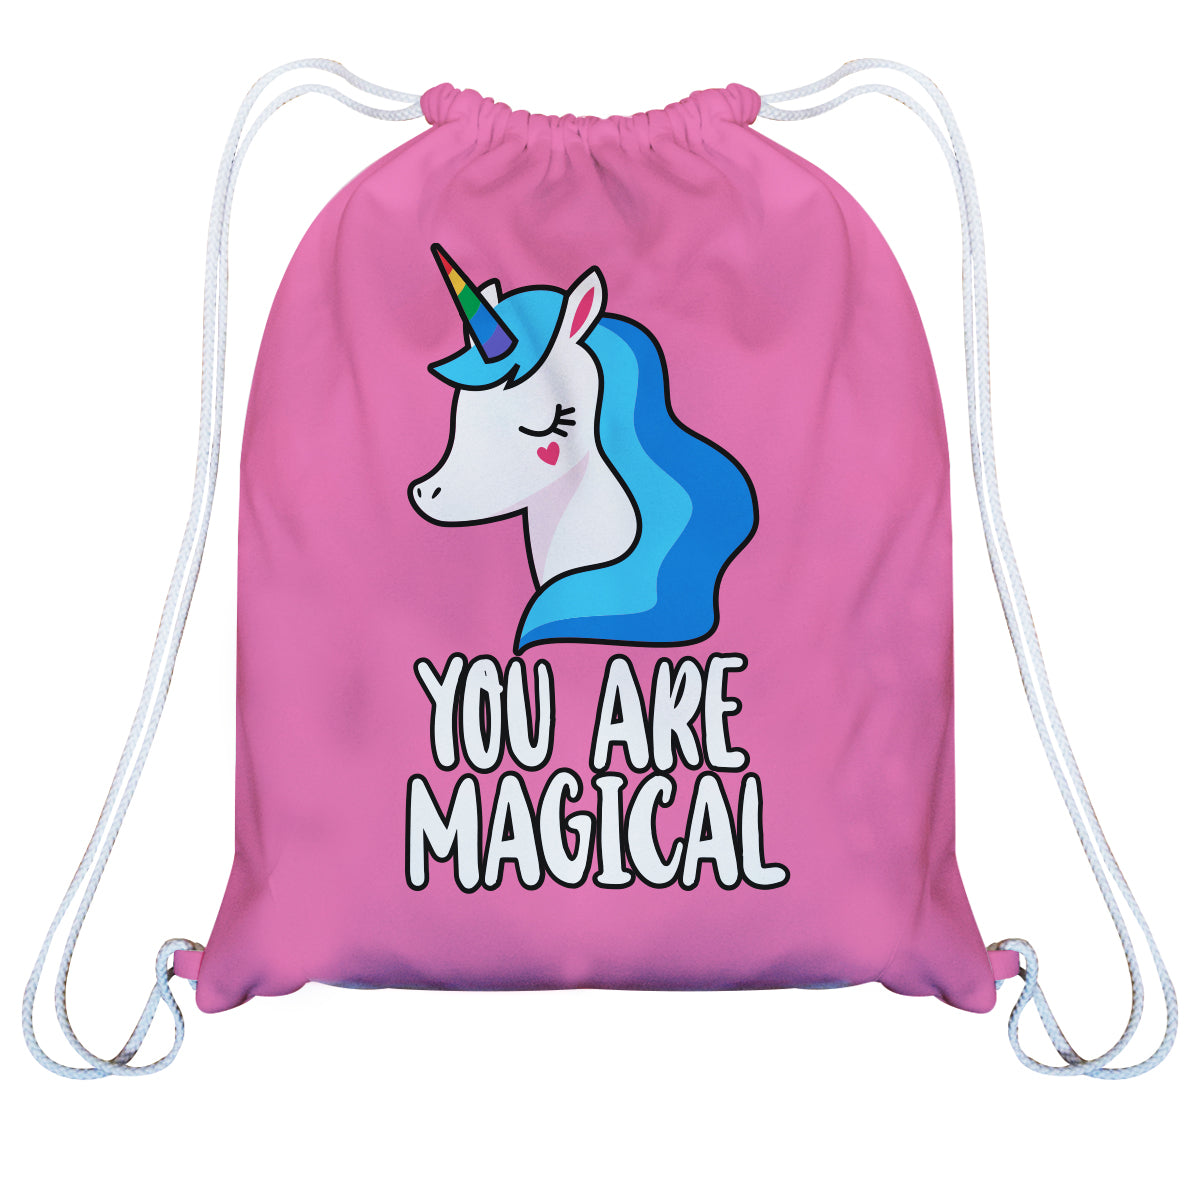 You Are Magical Pink Bag 14 x 19""